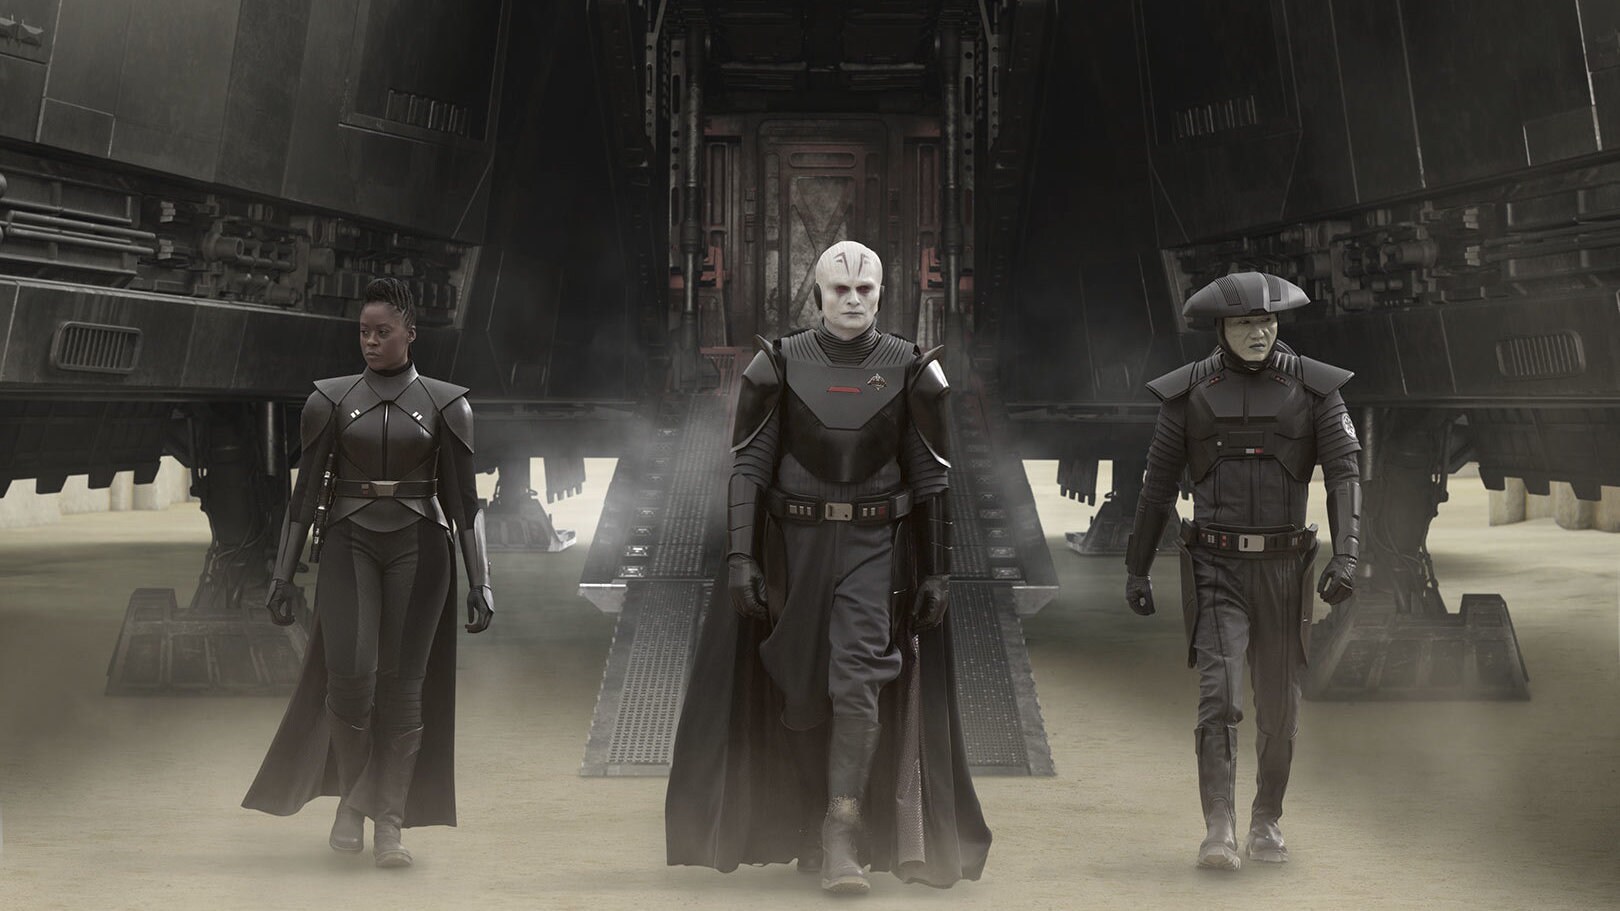 Ten years later, the Empire's Inquisitors arrive on Tatooine. They are Jedi hunters, and have tra...